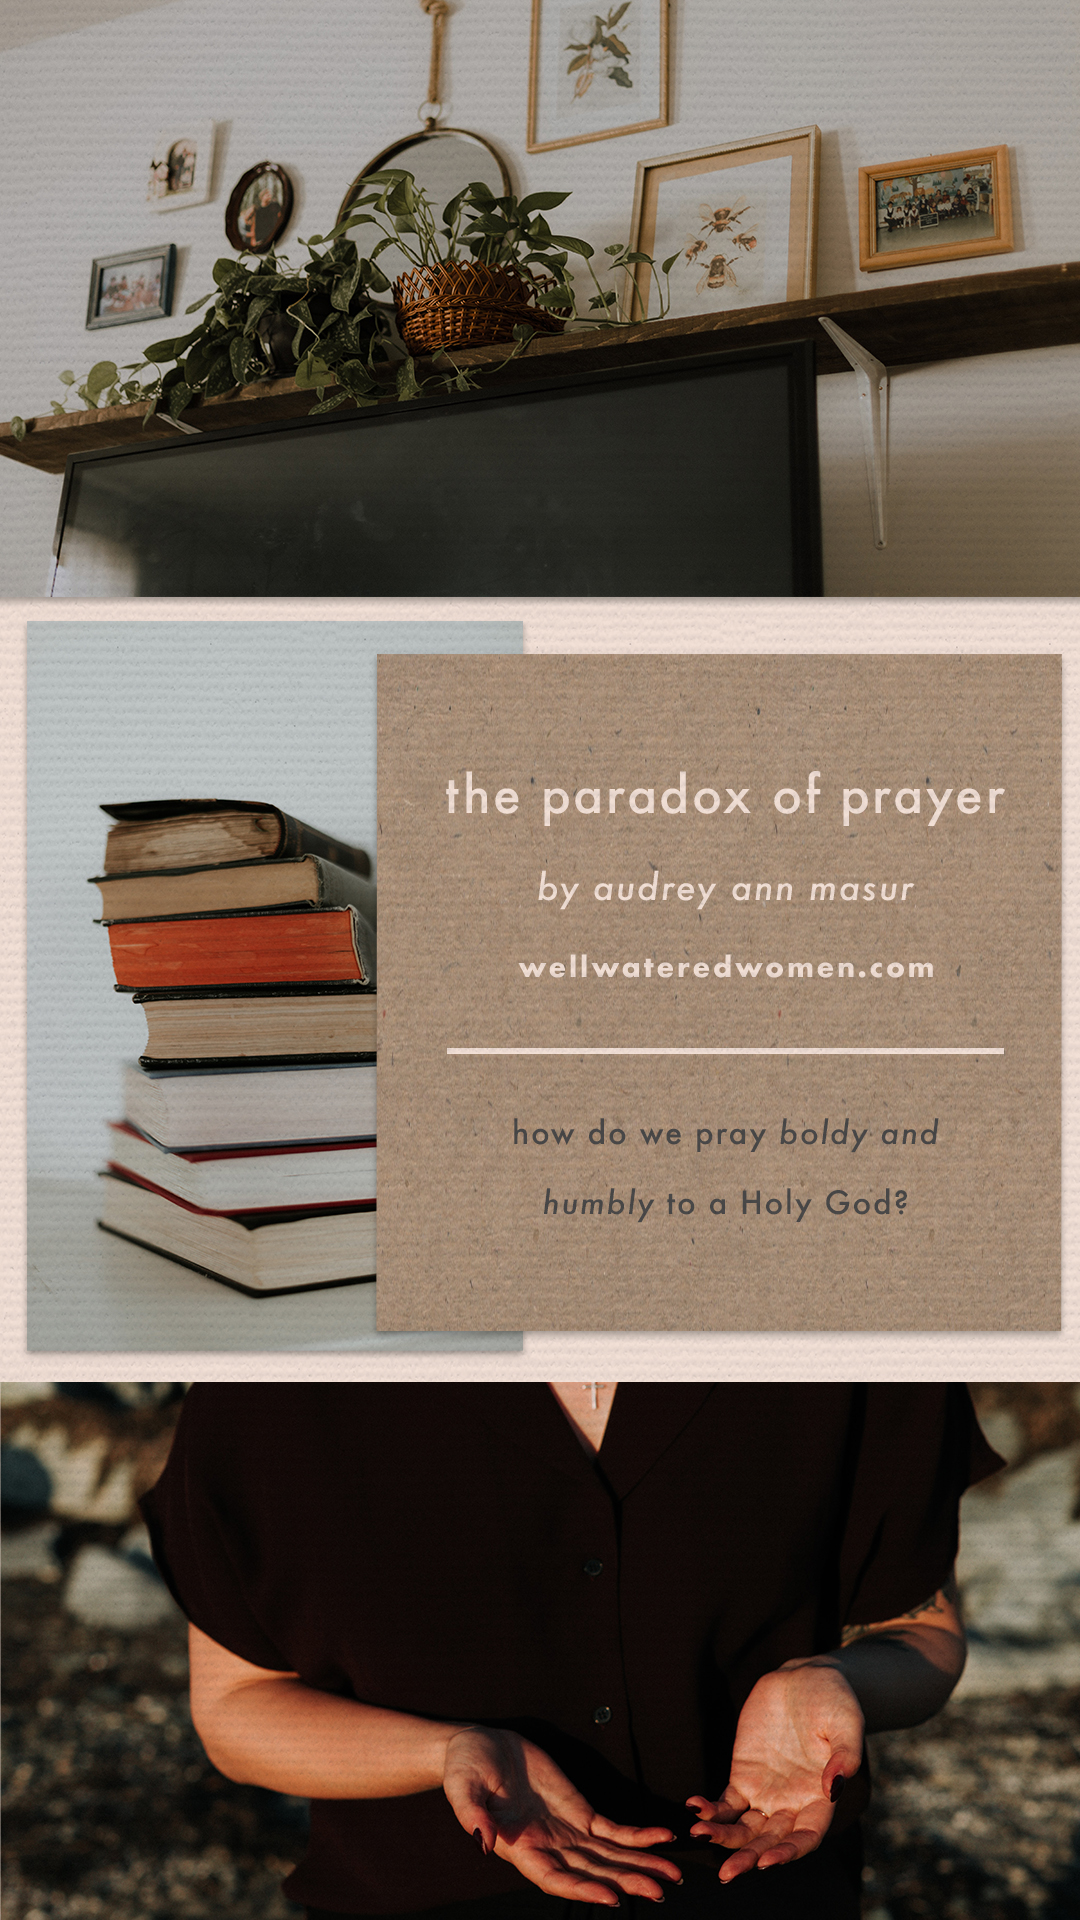 Well-Watered Women Blog | The Paradox of Prayer - Praying Boldly Before a Holy God and Trusting Him to Answer